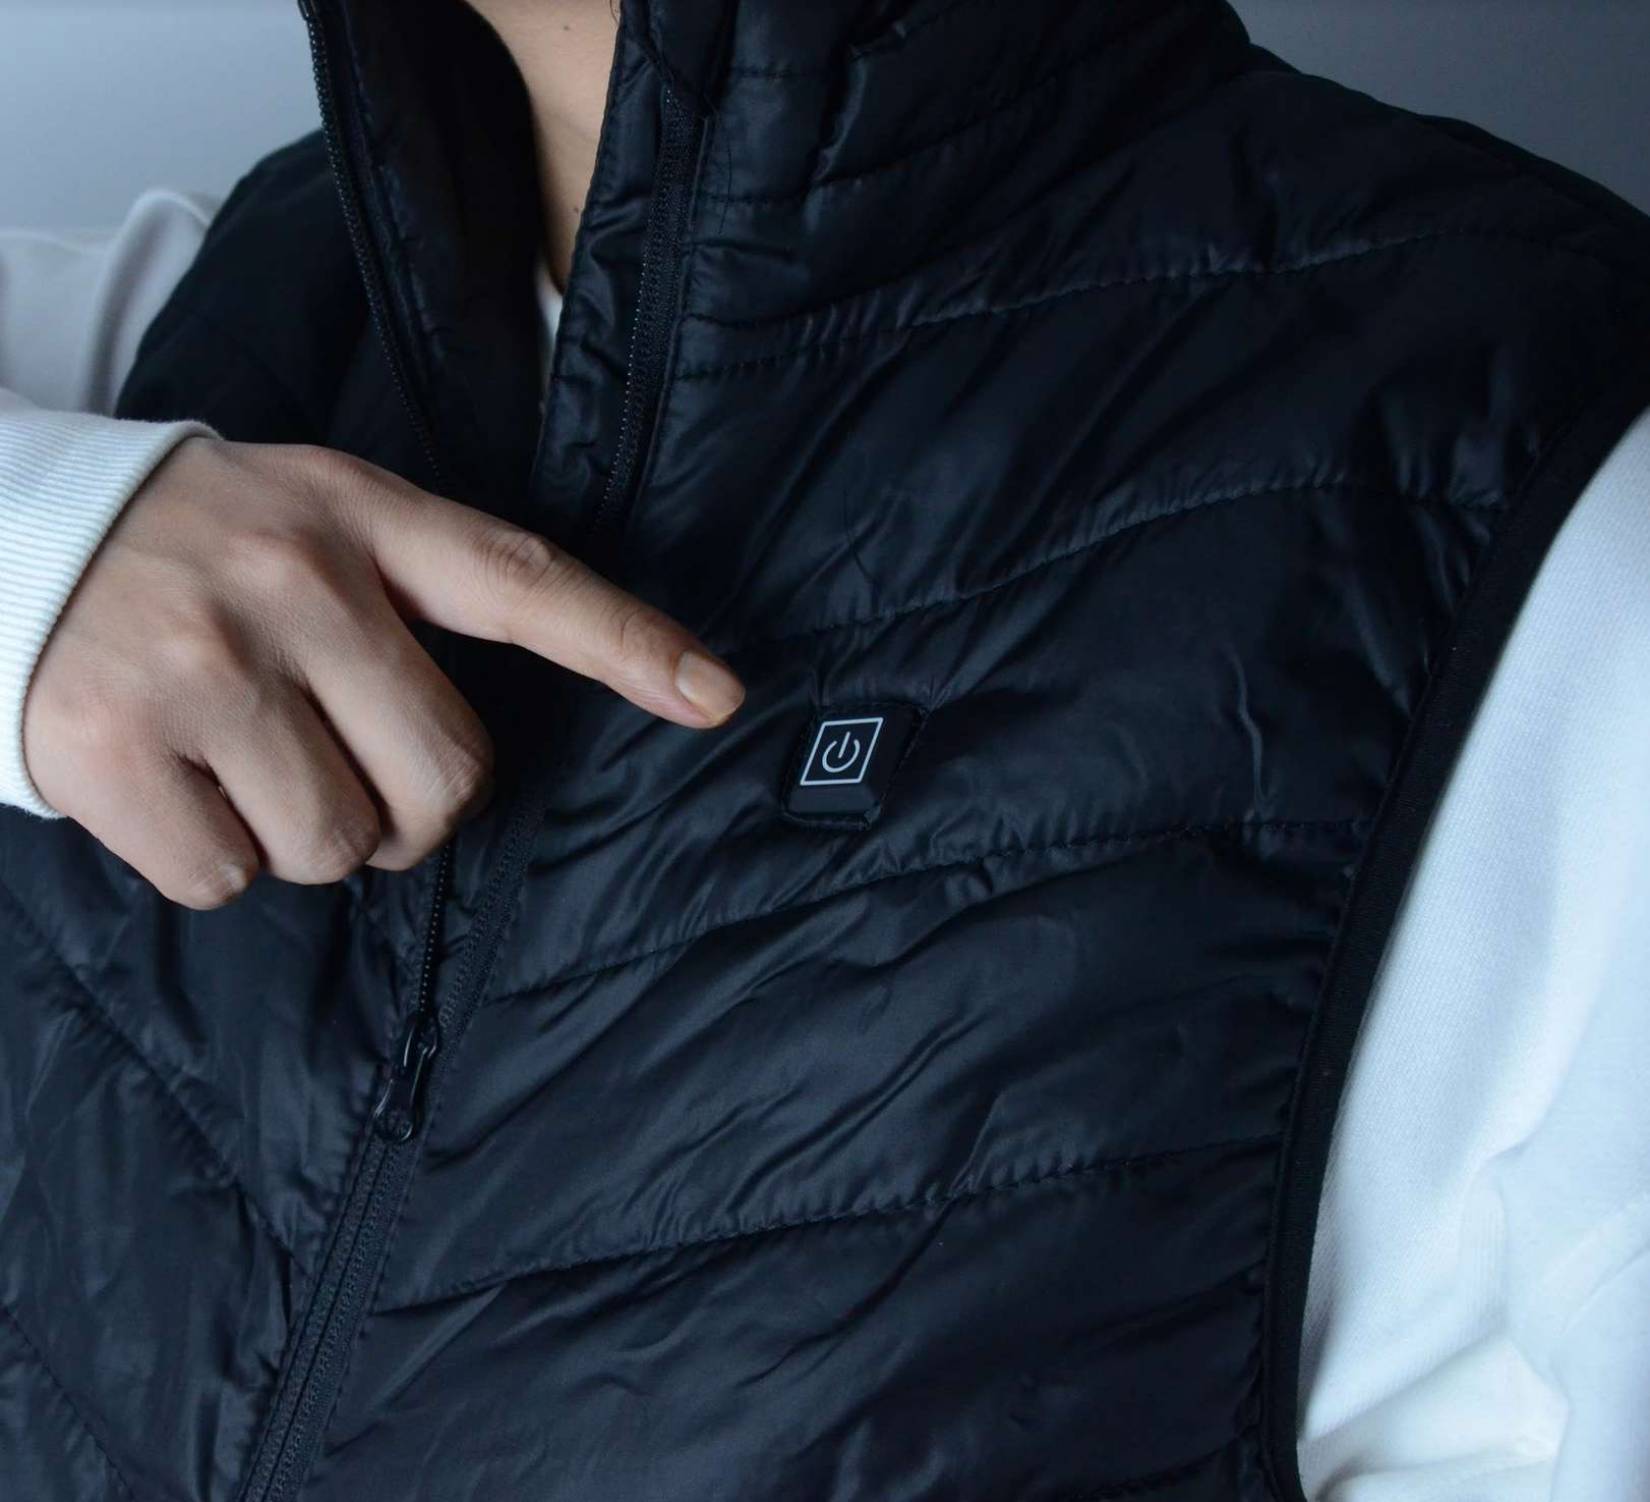 Heated Vest Under Jacket - Hidden Facts Revealed By The Experts